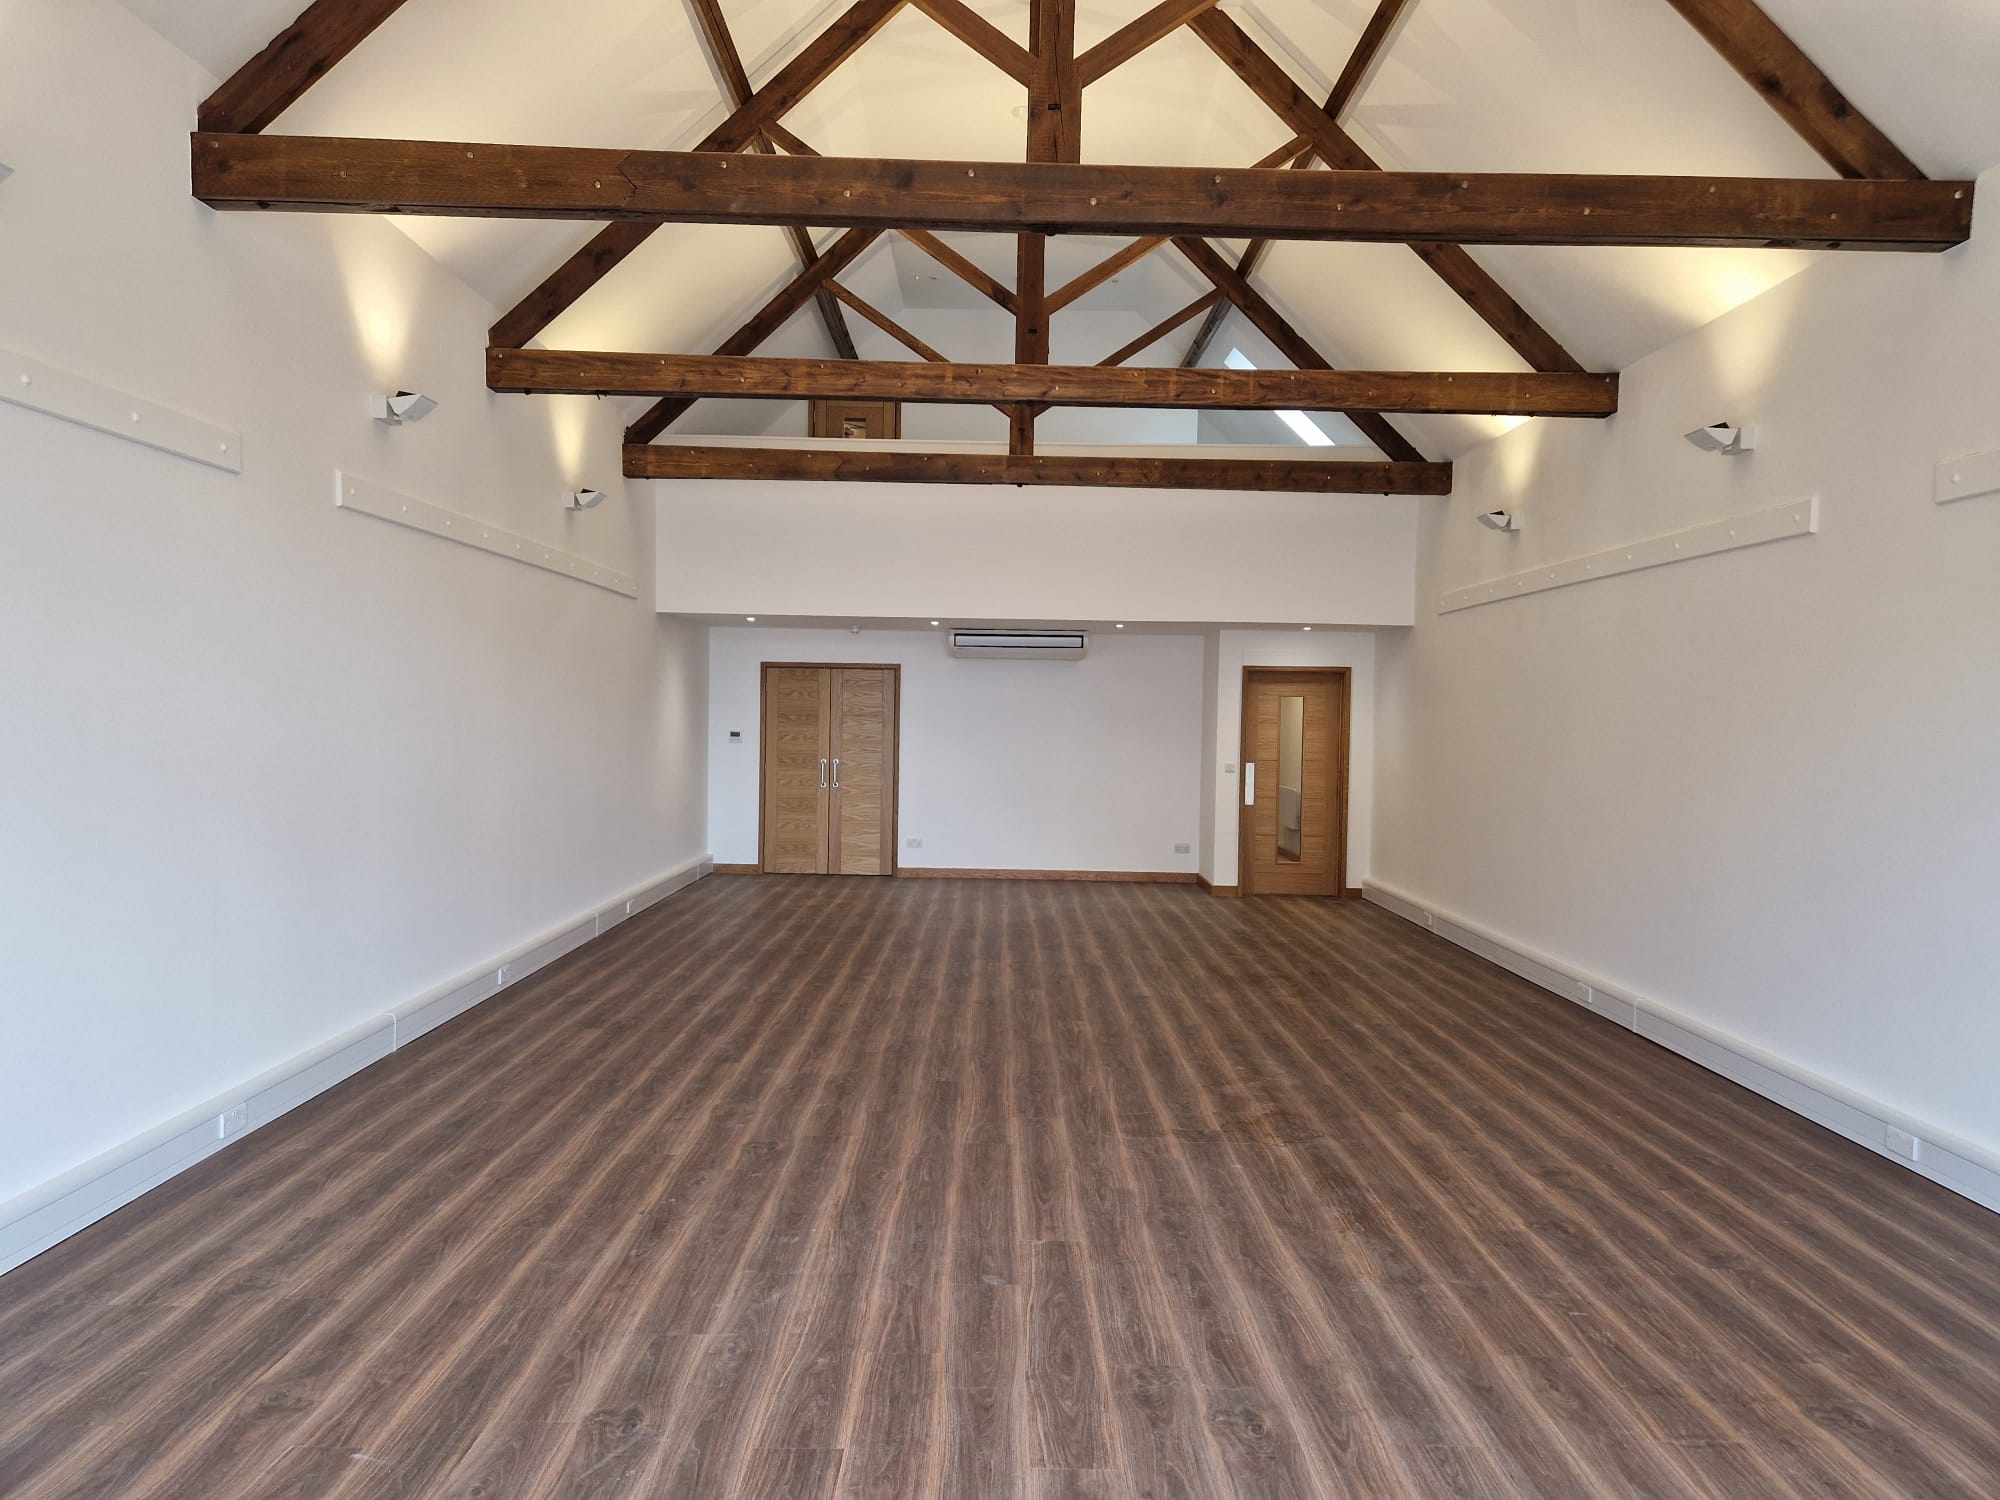 Immaculate Fitness Studio/Office to Let at Knapwell, Cambridge